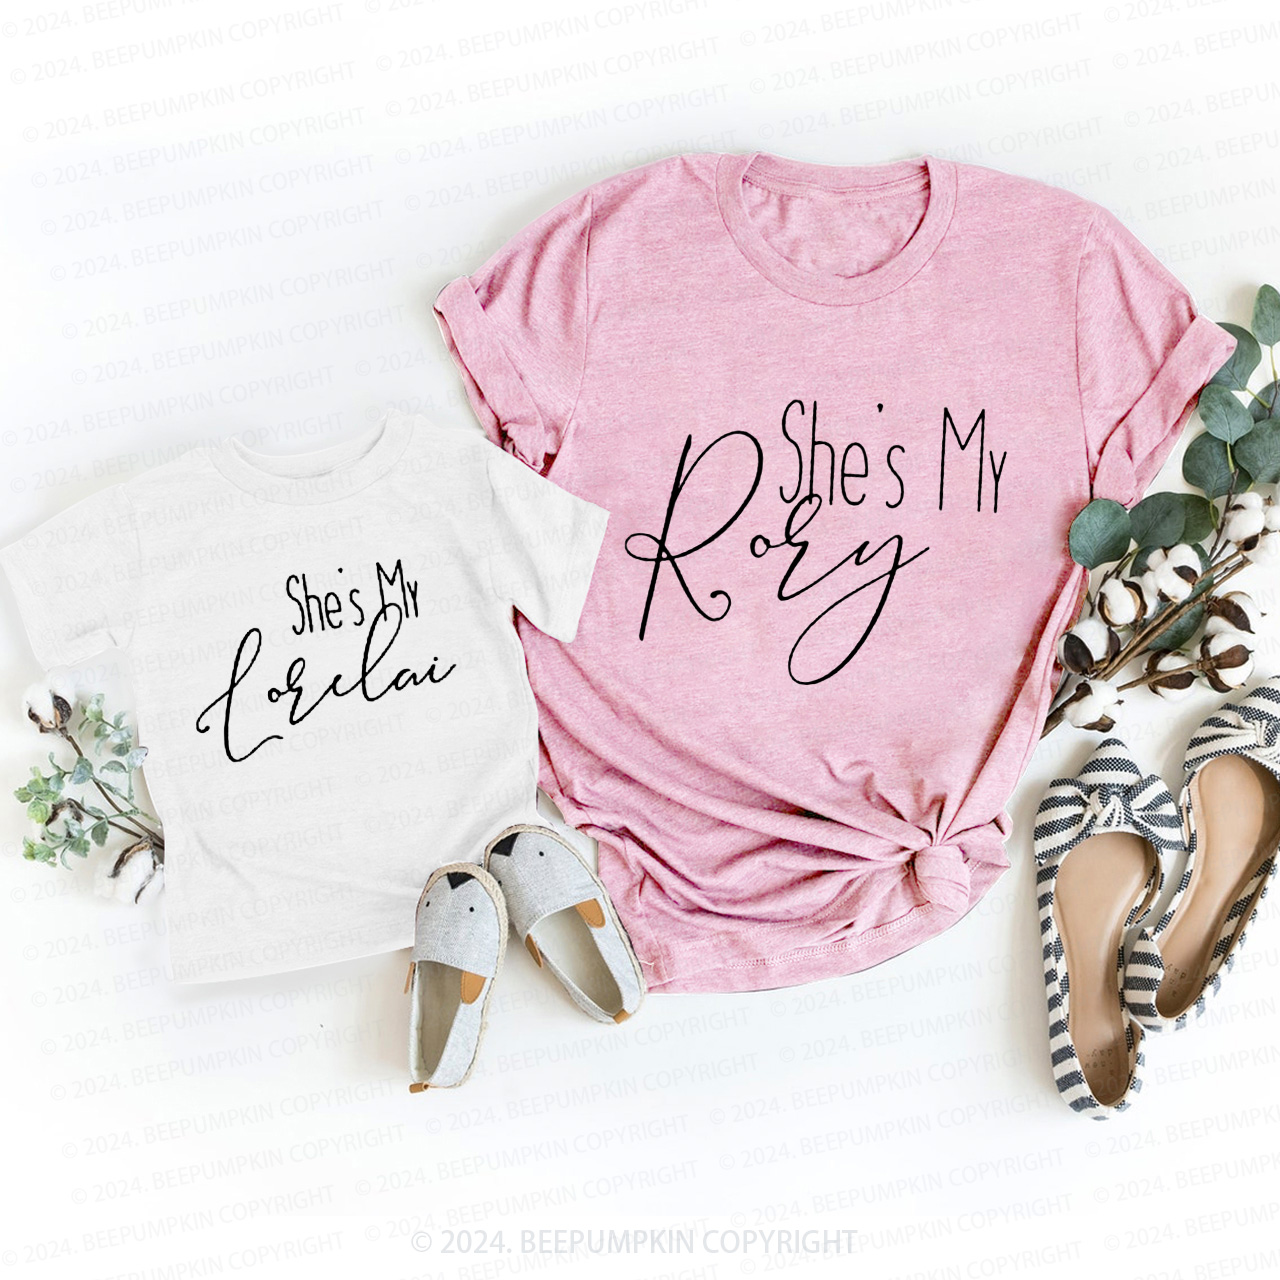 Lorelai And Rory T-Shirts For Mom&Me